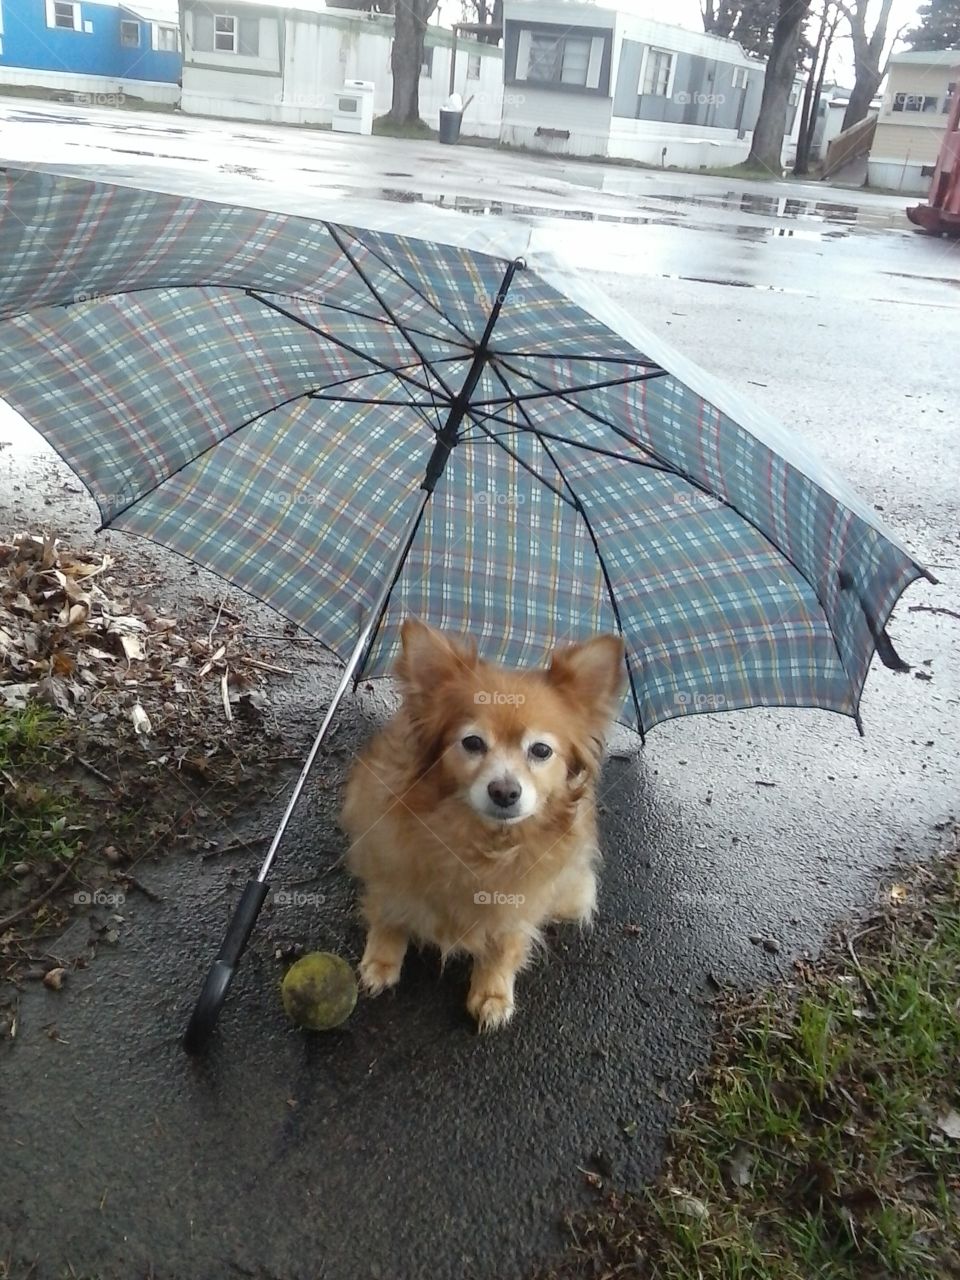 It raining I will hide under t. Pomeranian dog loves to be outside but does not want to get wet.